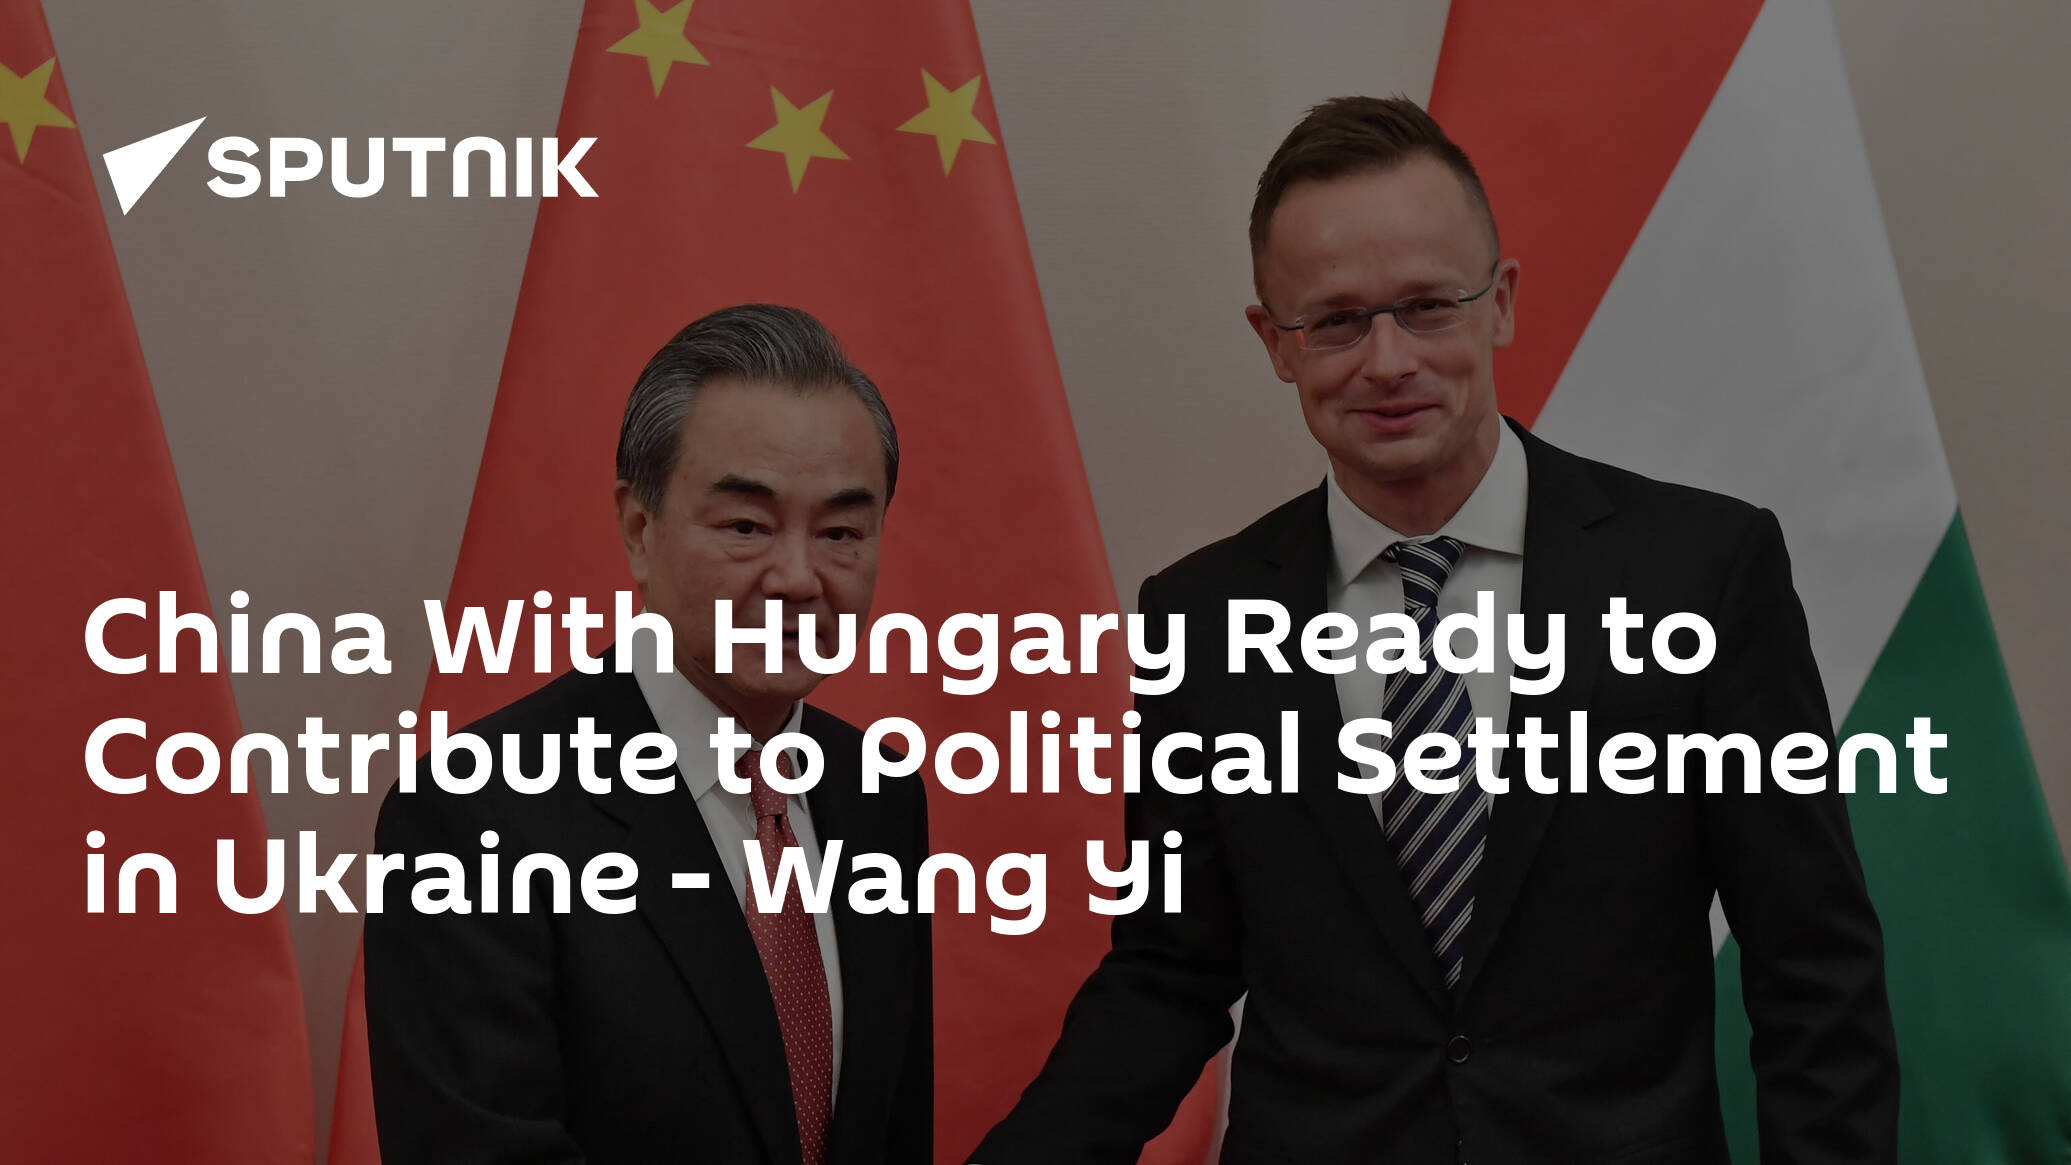 China With Hungary Ready to Contribute to Political Settlement in Ukraine - Wang Yi